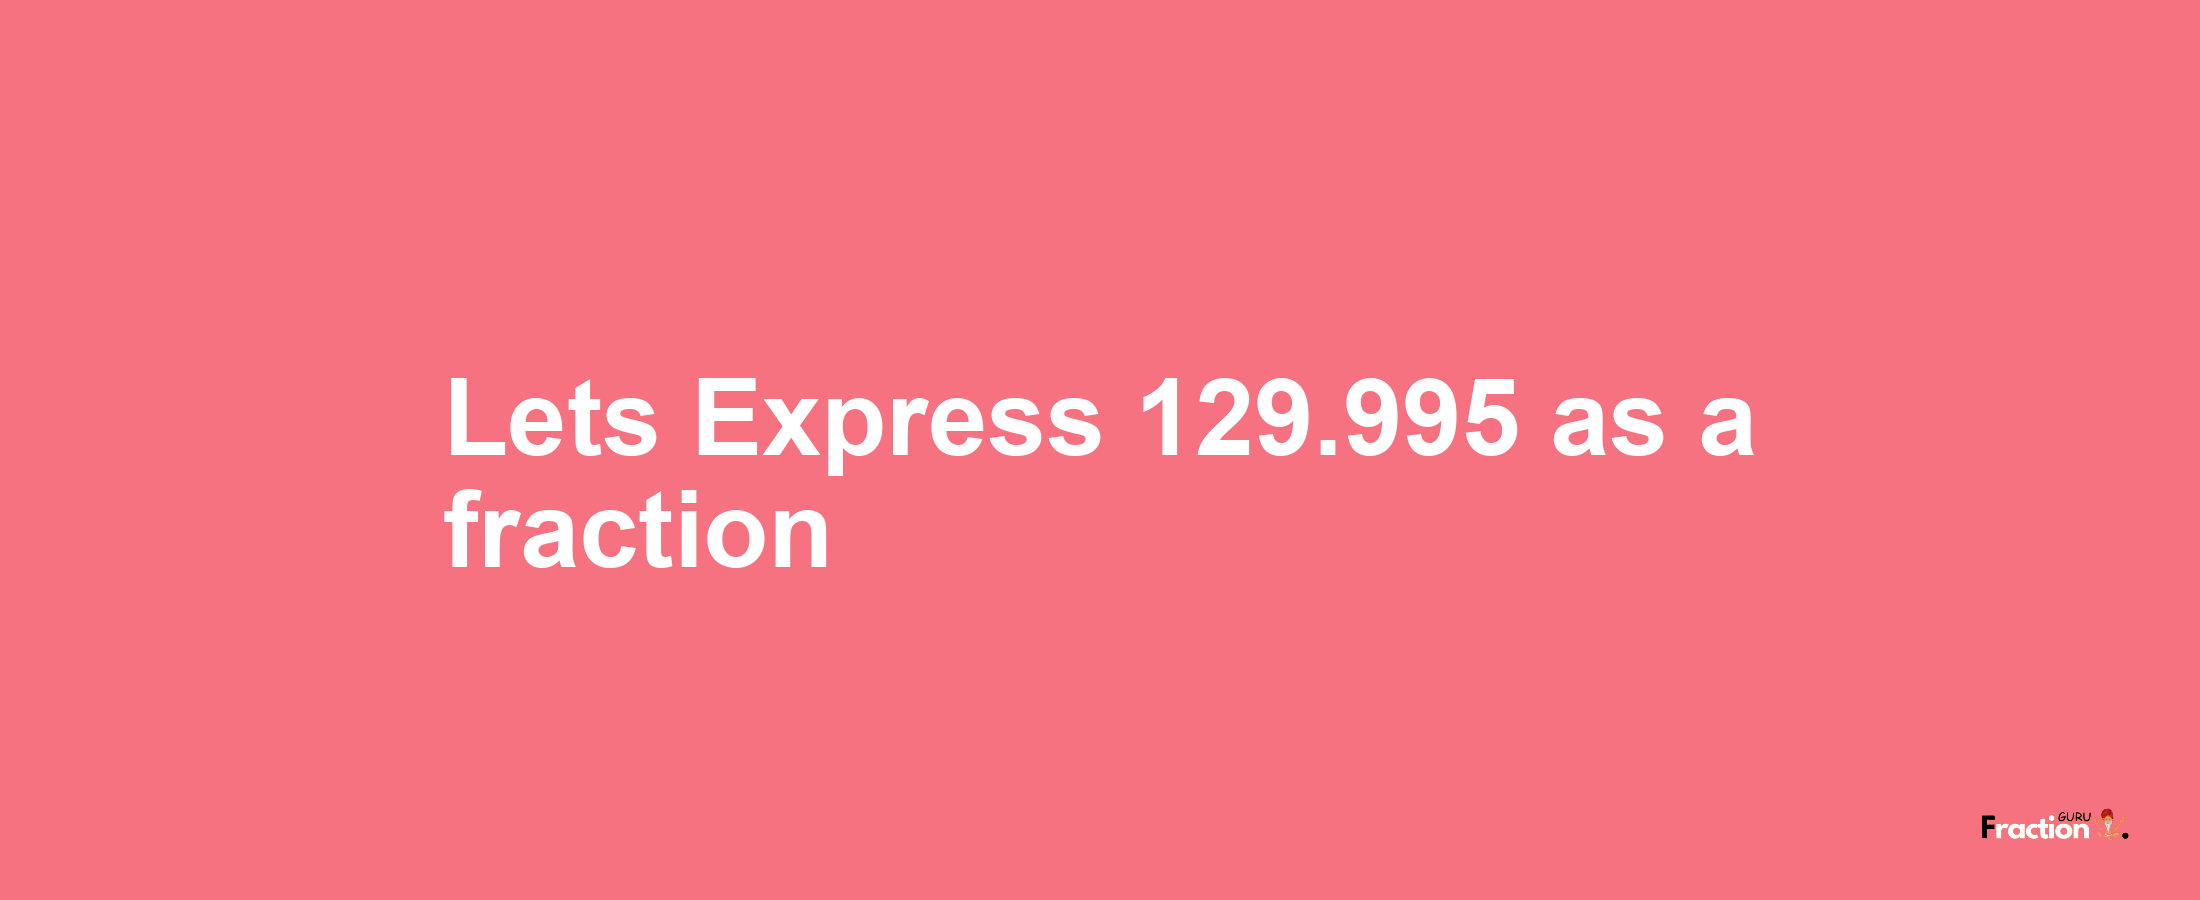 Lets Express 129.995 as afraction